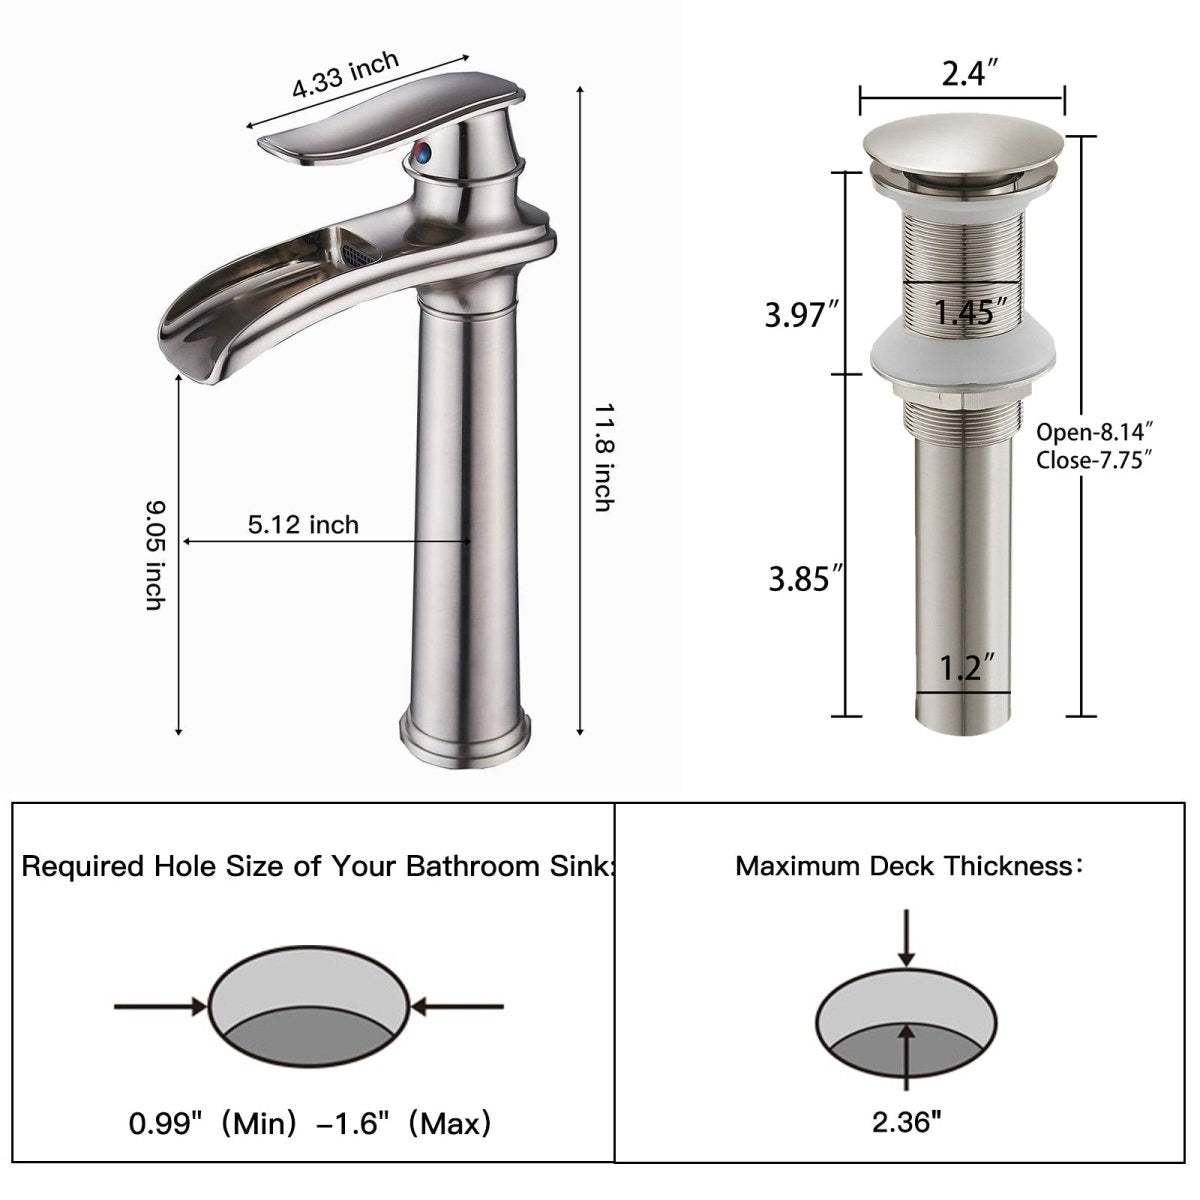 Waterfall Tall Spout Vessel Sink Bathroom Faucet Brushed Nickel - buyfaucet.com